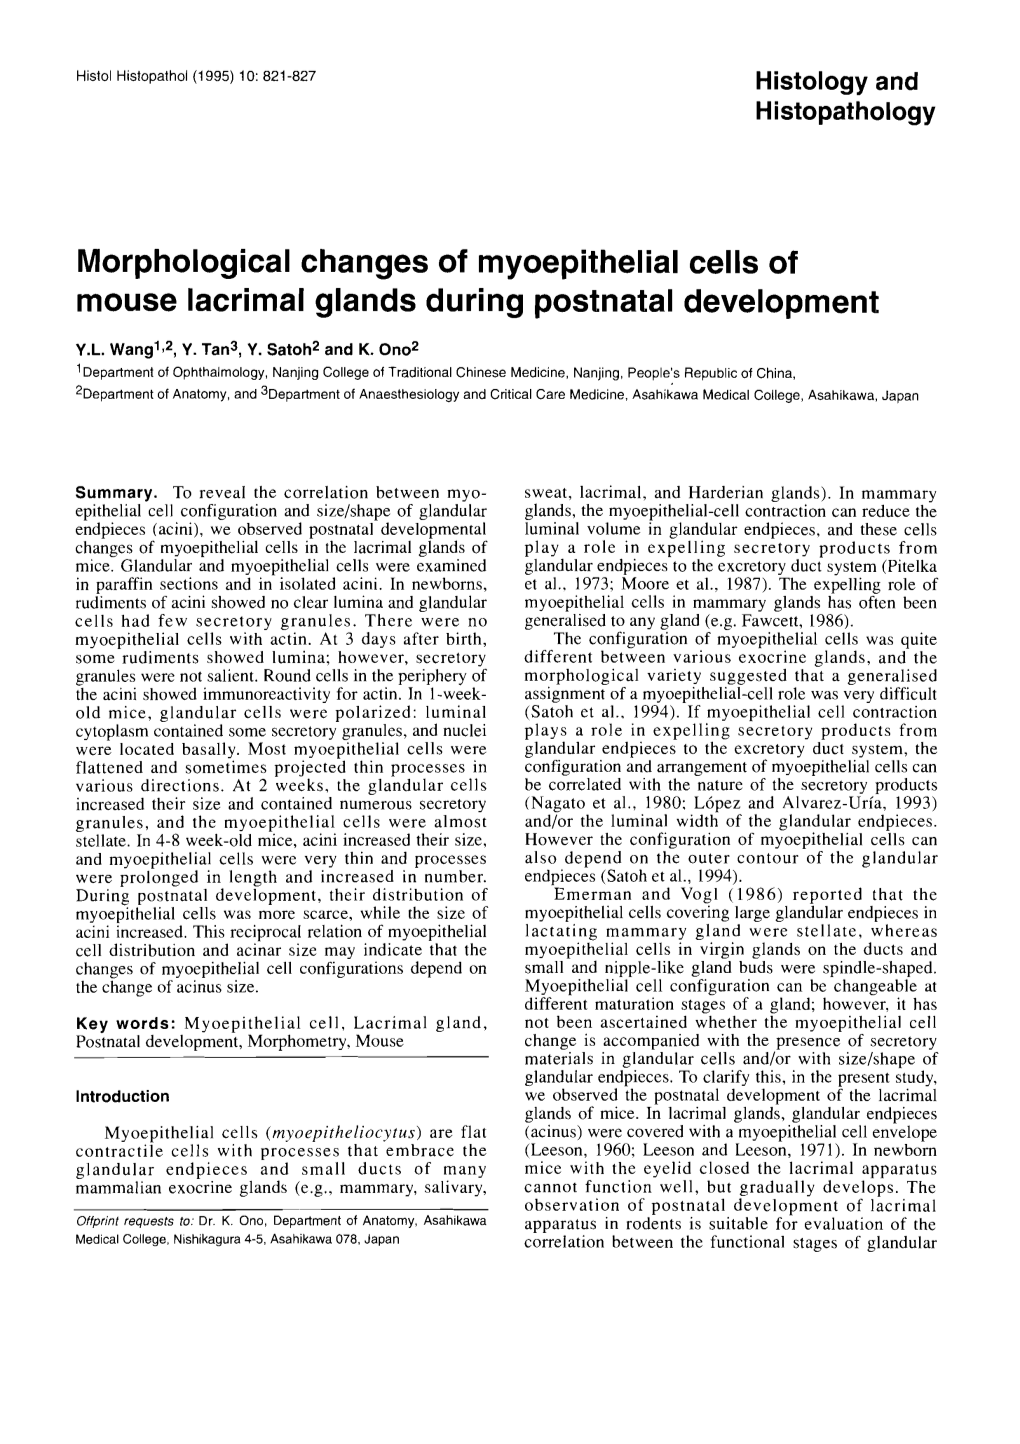 Morphological Changes of Myoepithelial Cells Of.Pdf